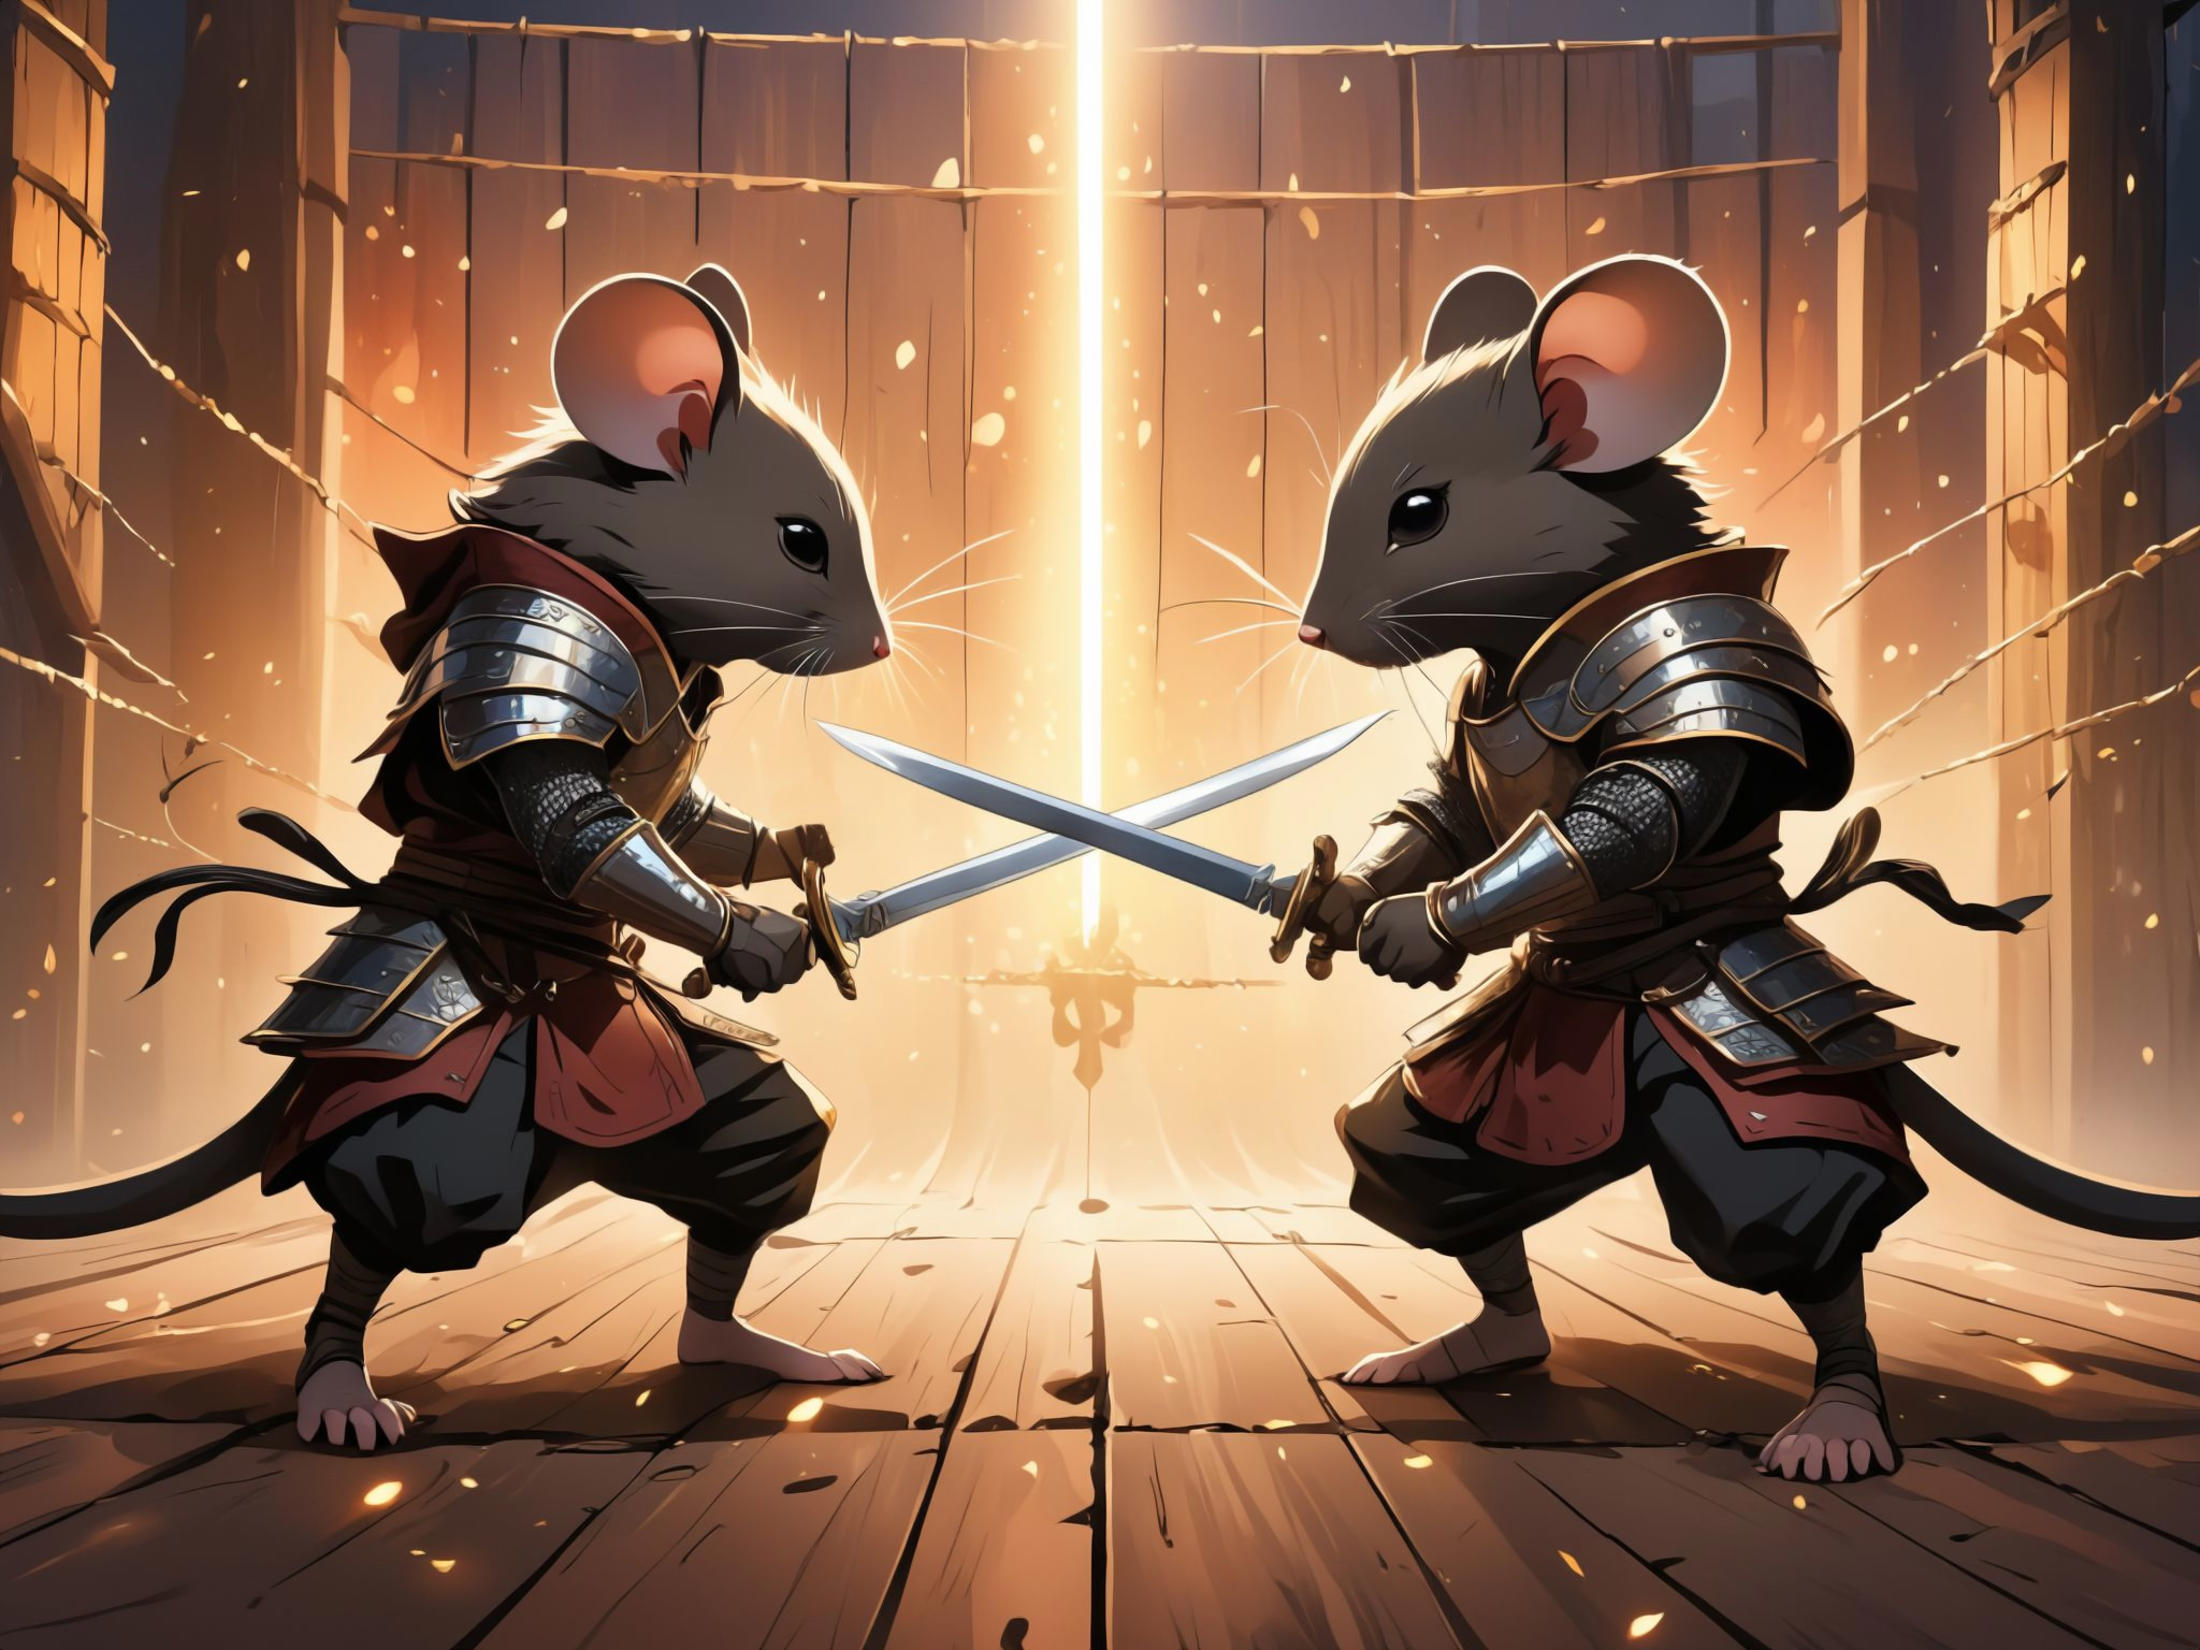 Two mice dressed in armor, holding swords and facing each other.